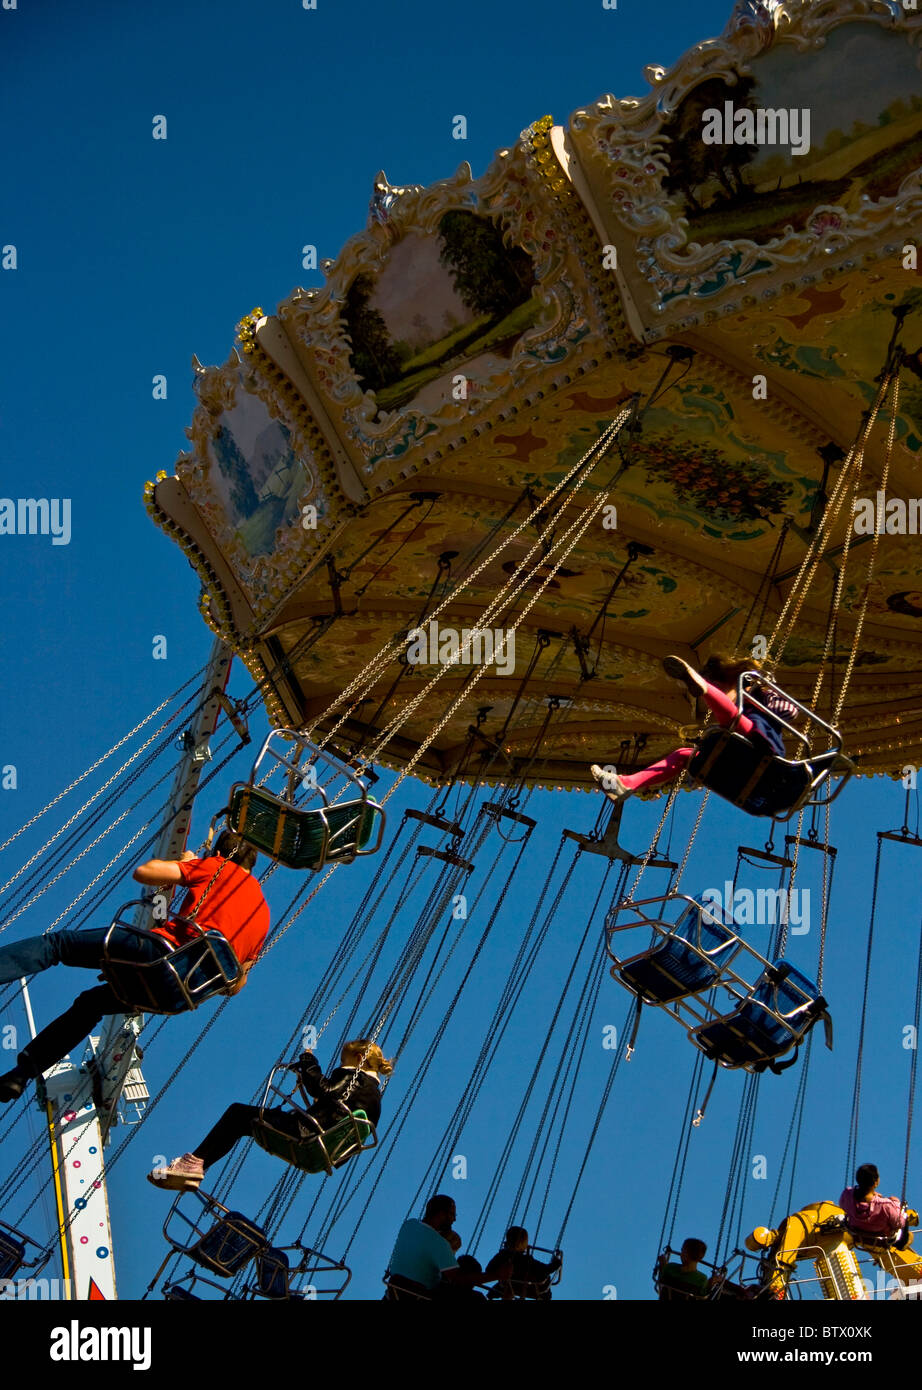 Traditional chair swing carousel in action against clear blue sky Stock Photo